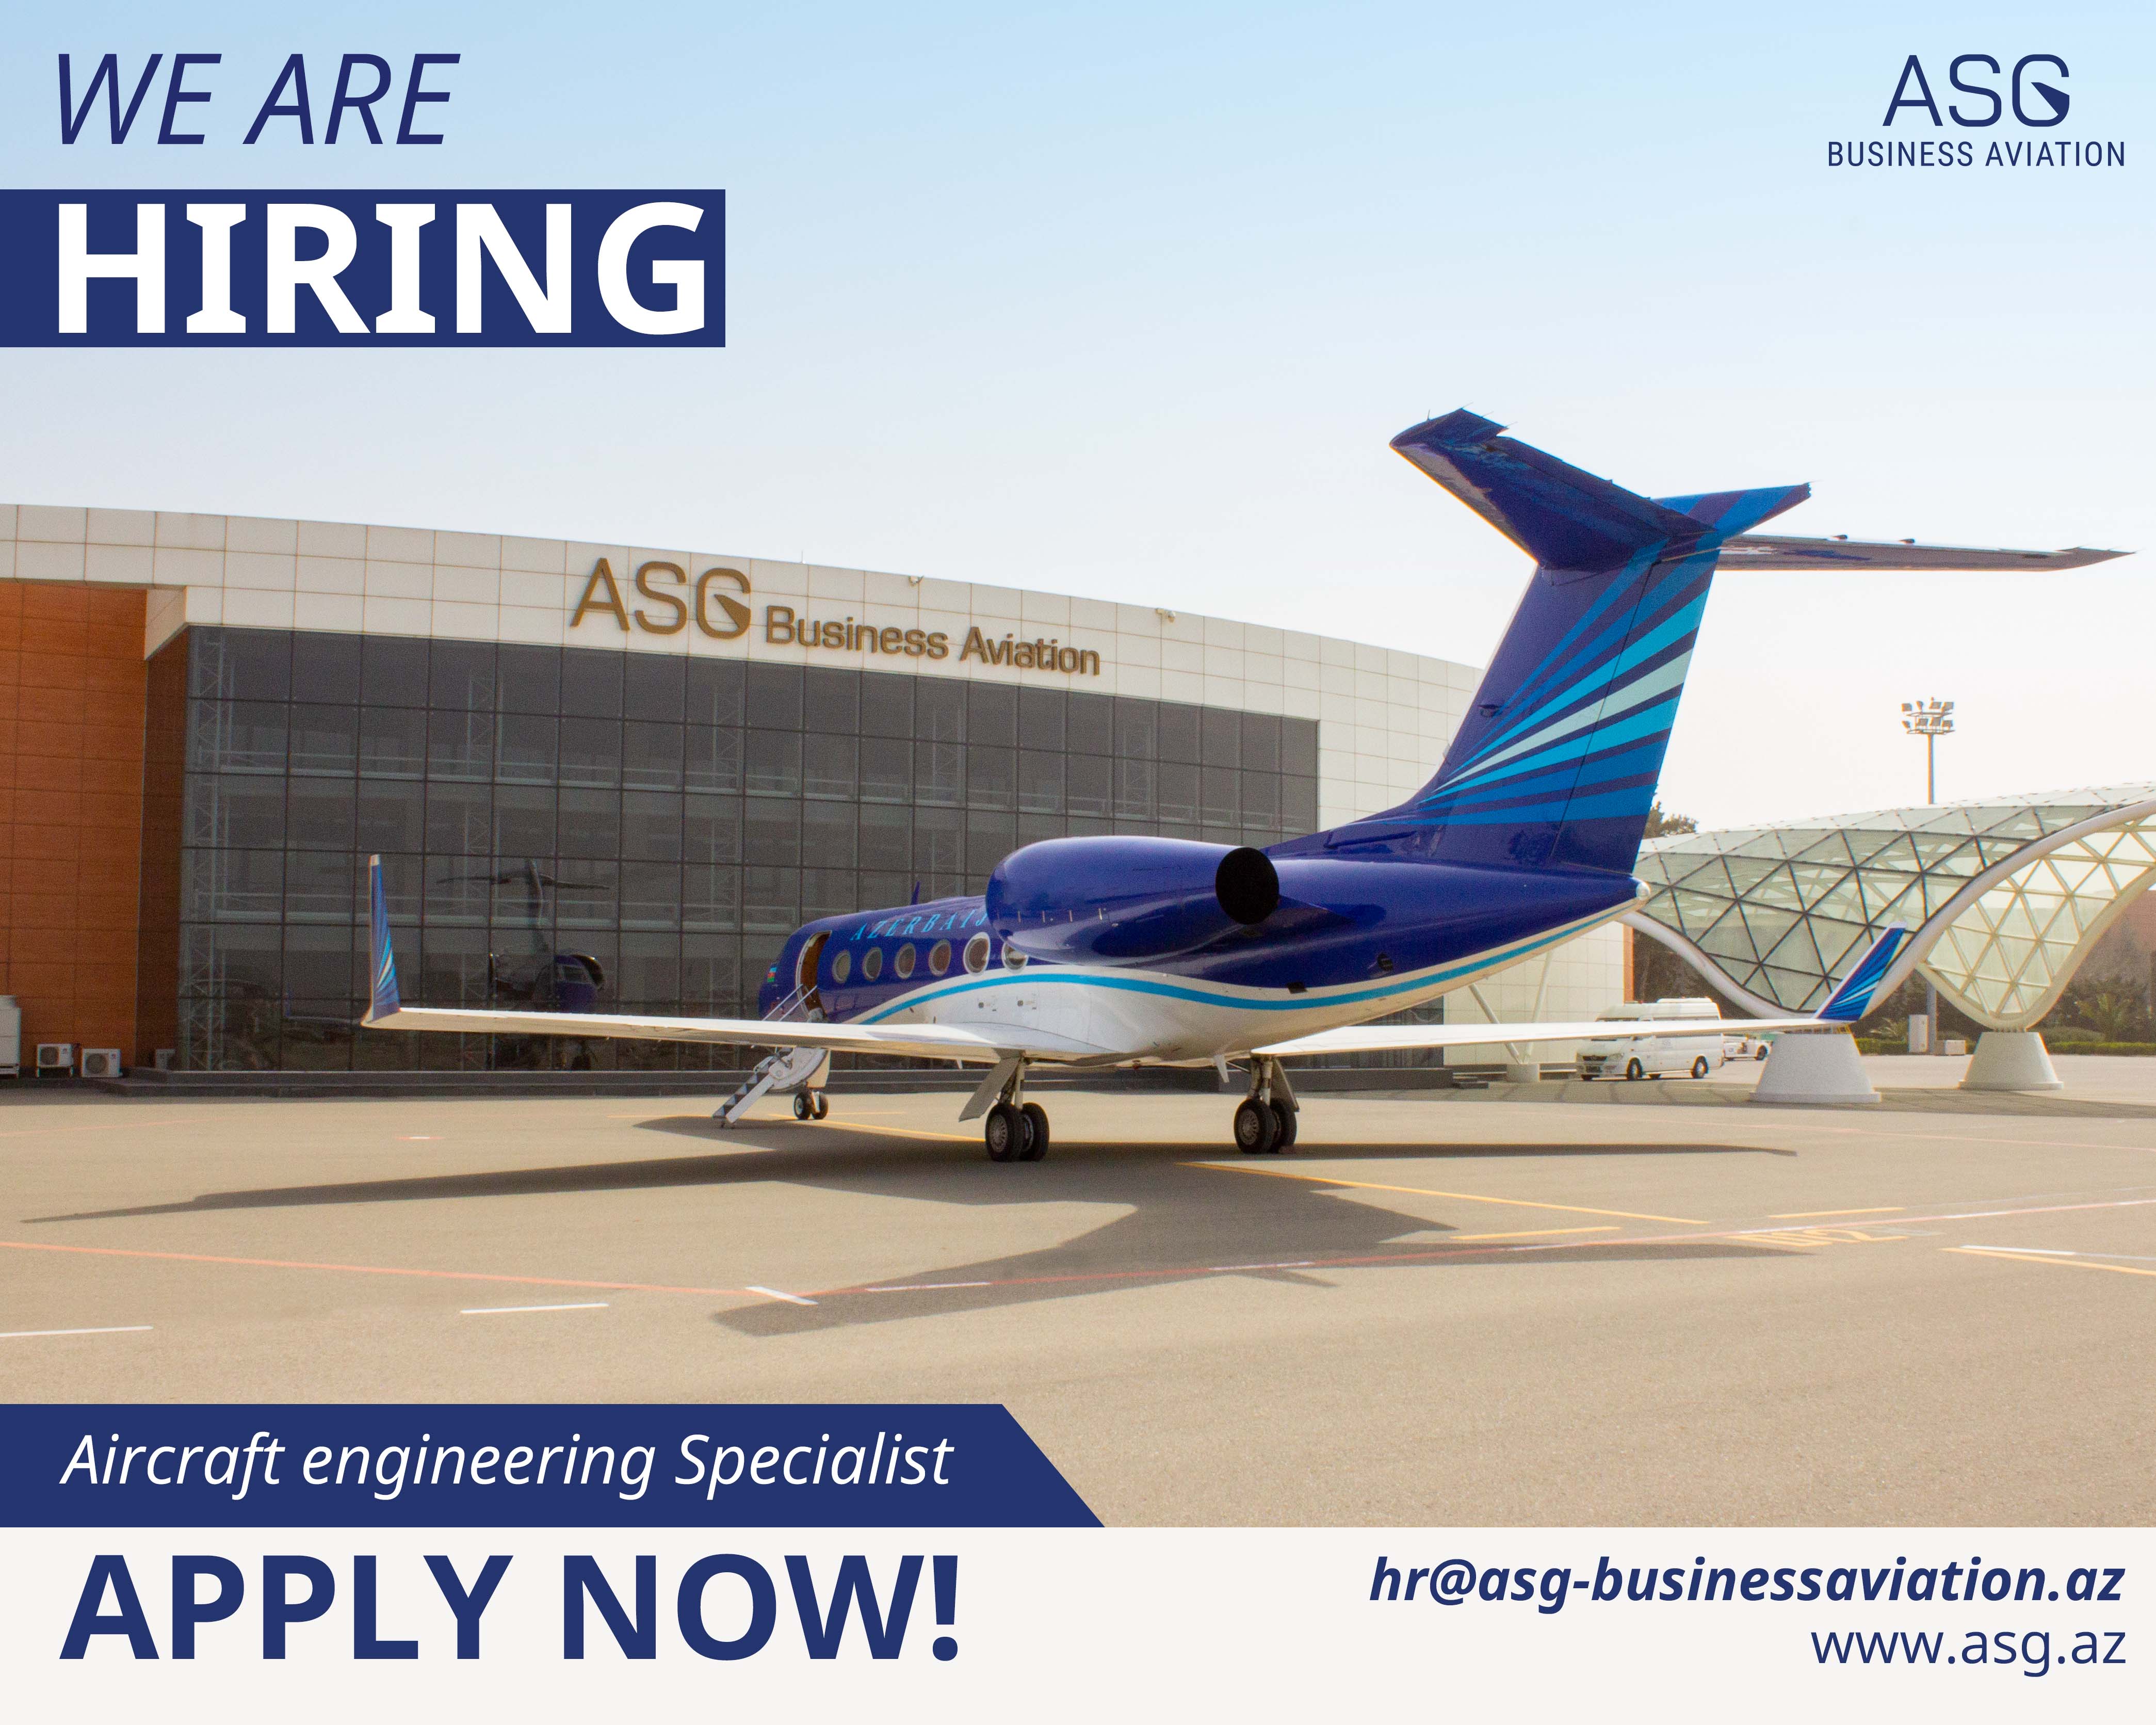 ASG Business Aviation is seeking to recruit Aircraft Engineering Specialists